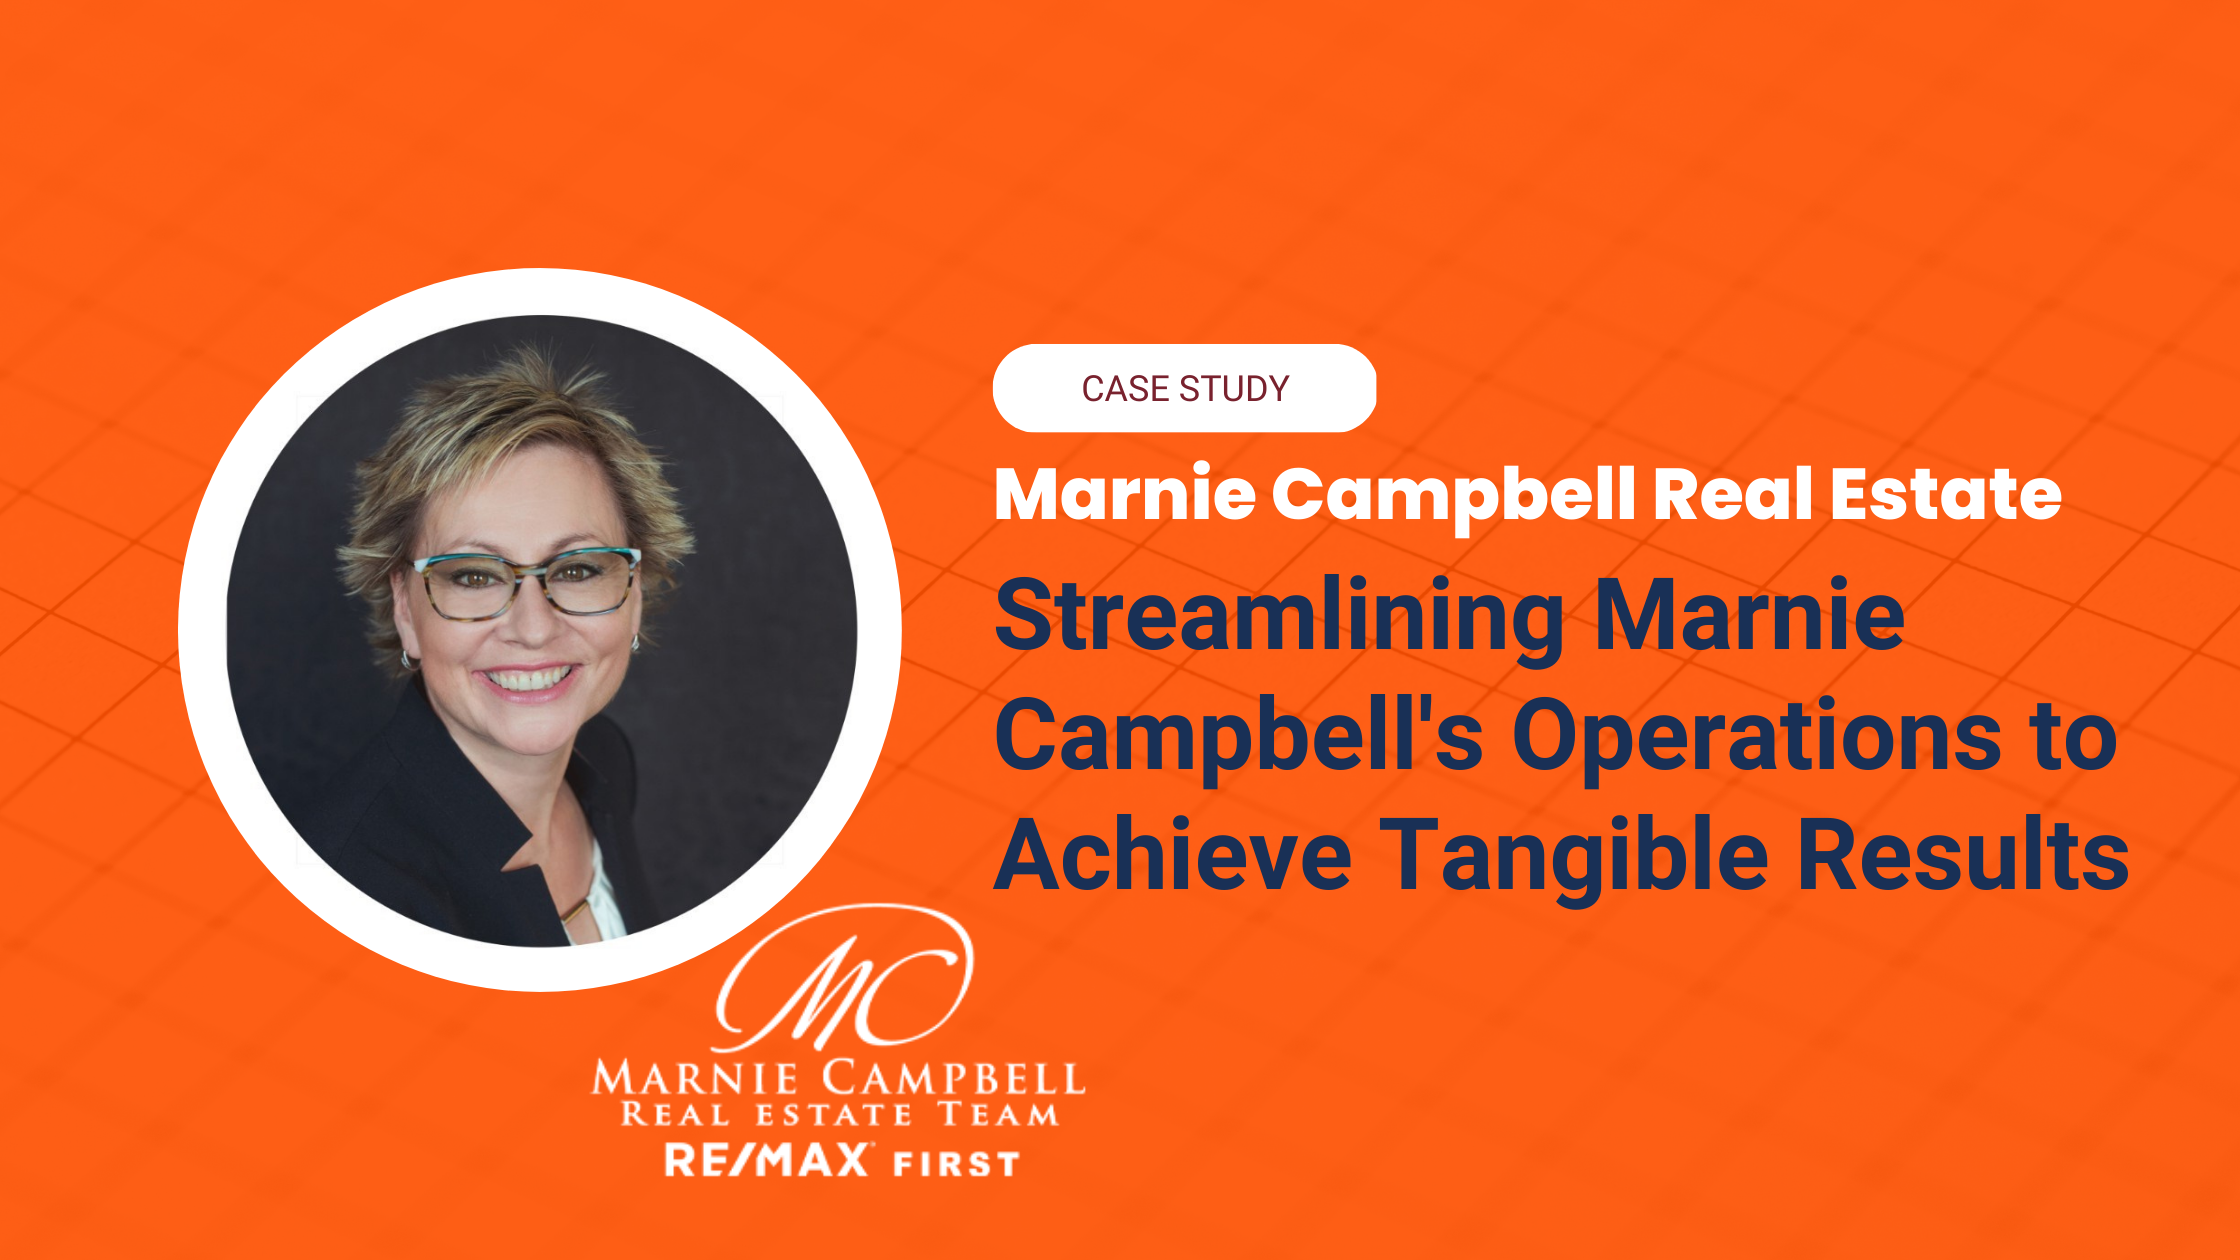 Streamlining Marnie Campbell's Operations to Achieve Tangible Results